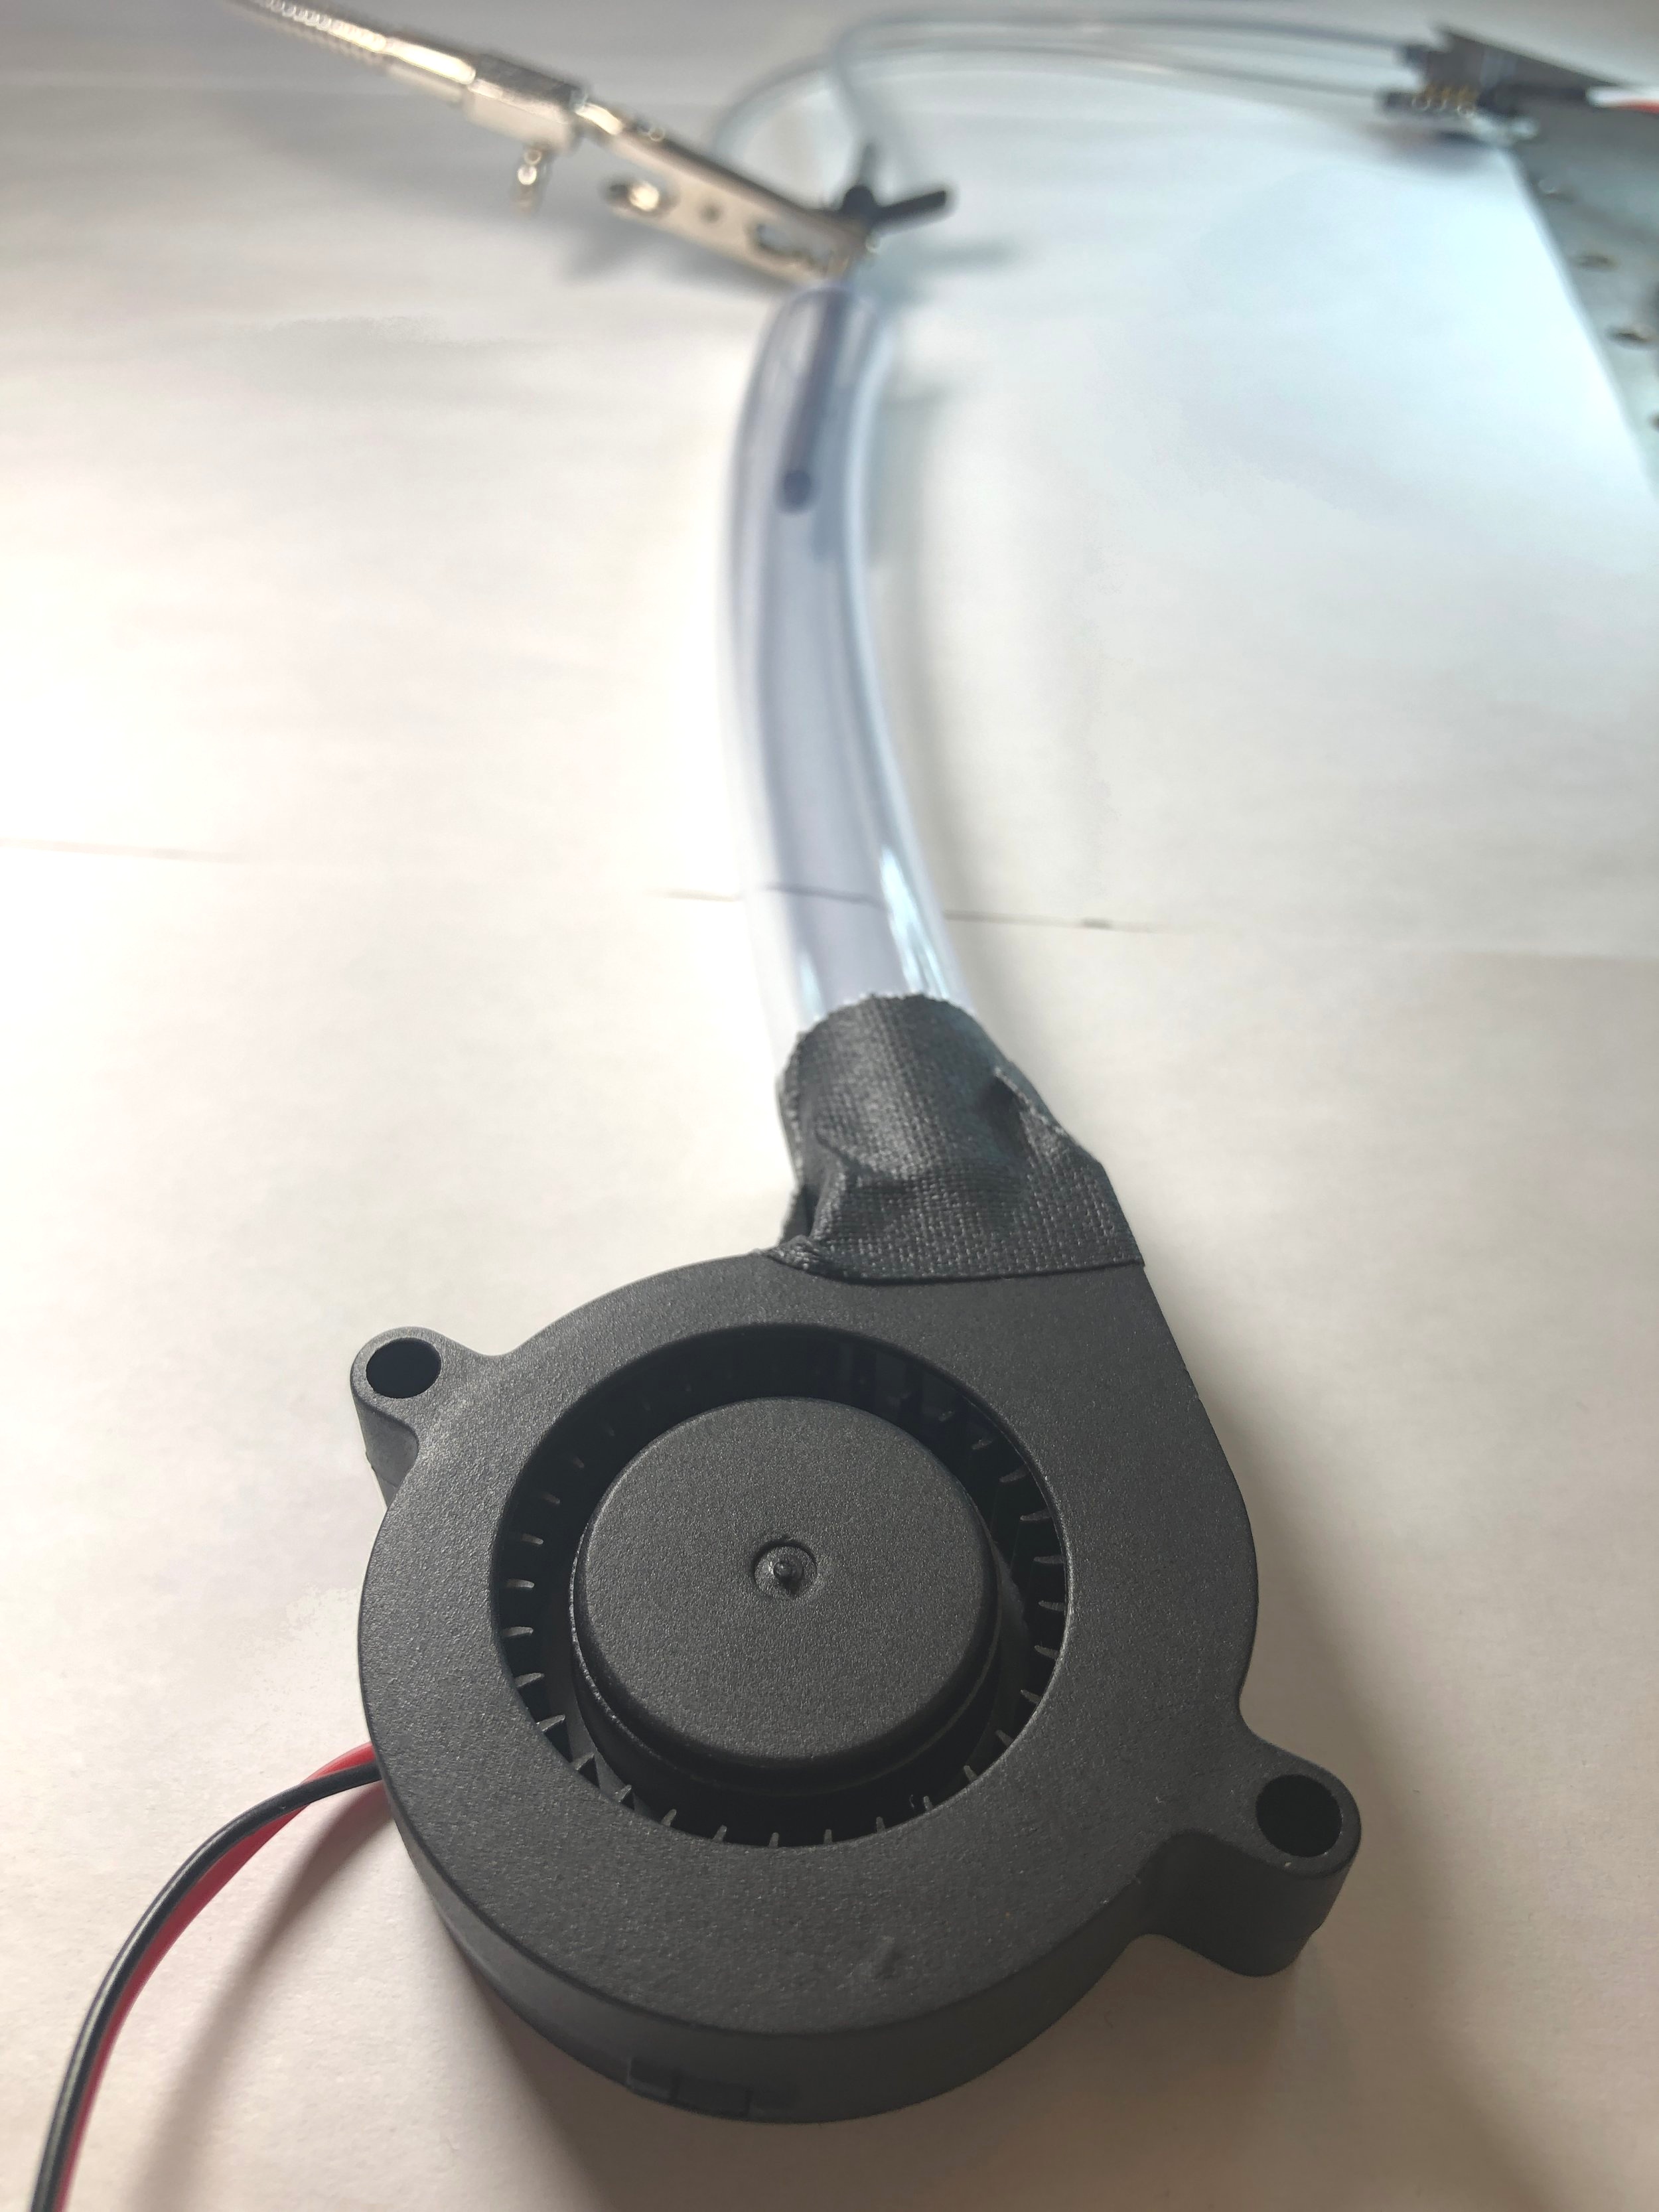 5V Blower fan connected to acrylic tube